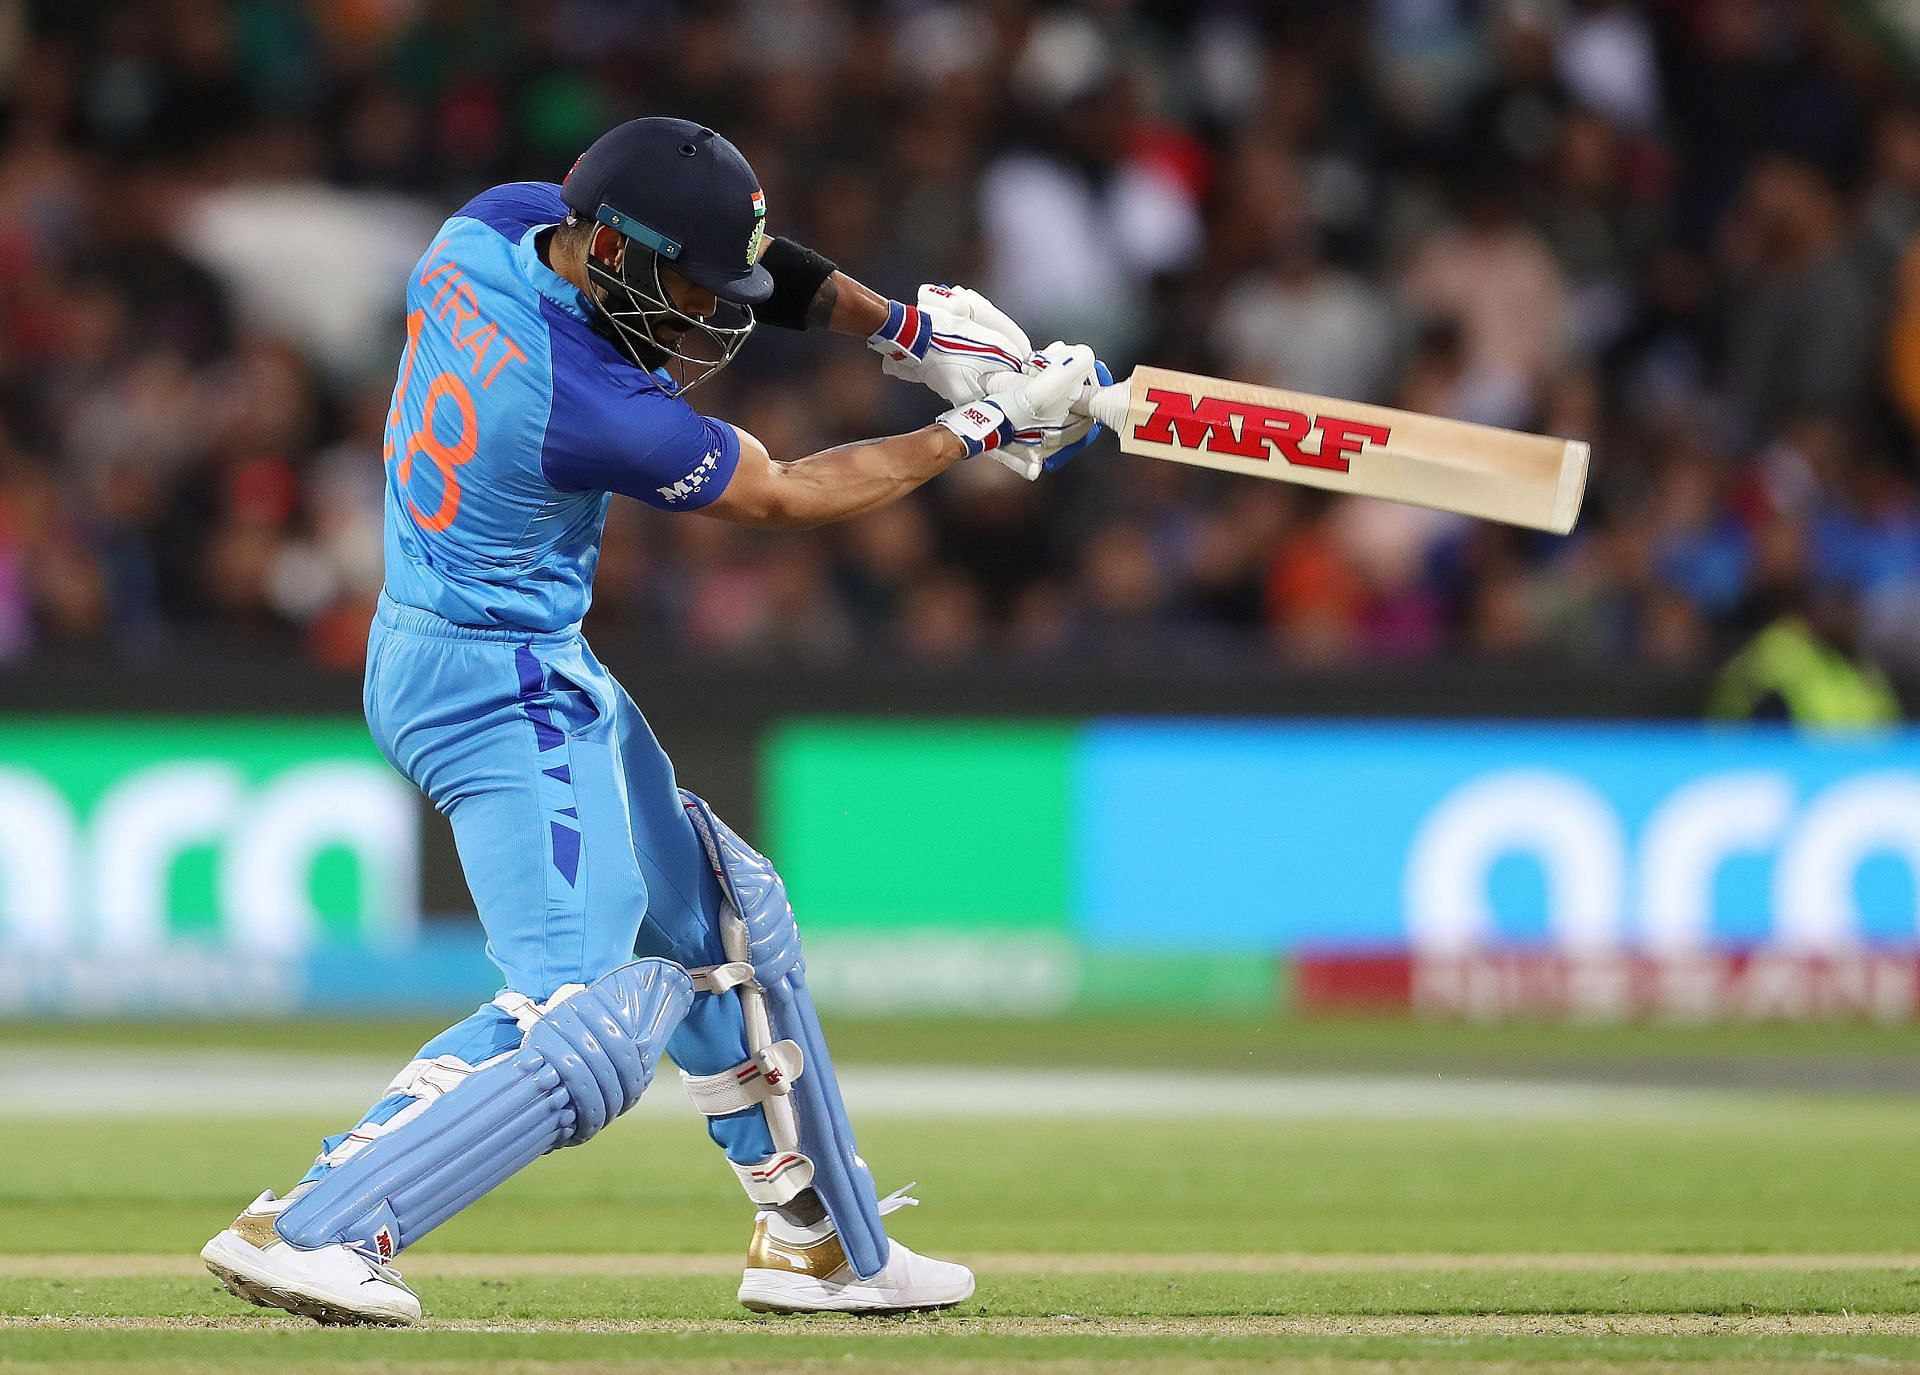 Virat Kohli struck eight fours and a six during his innings.